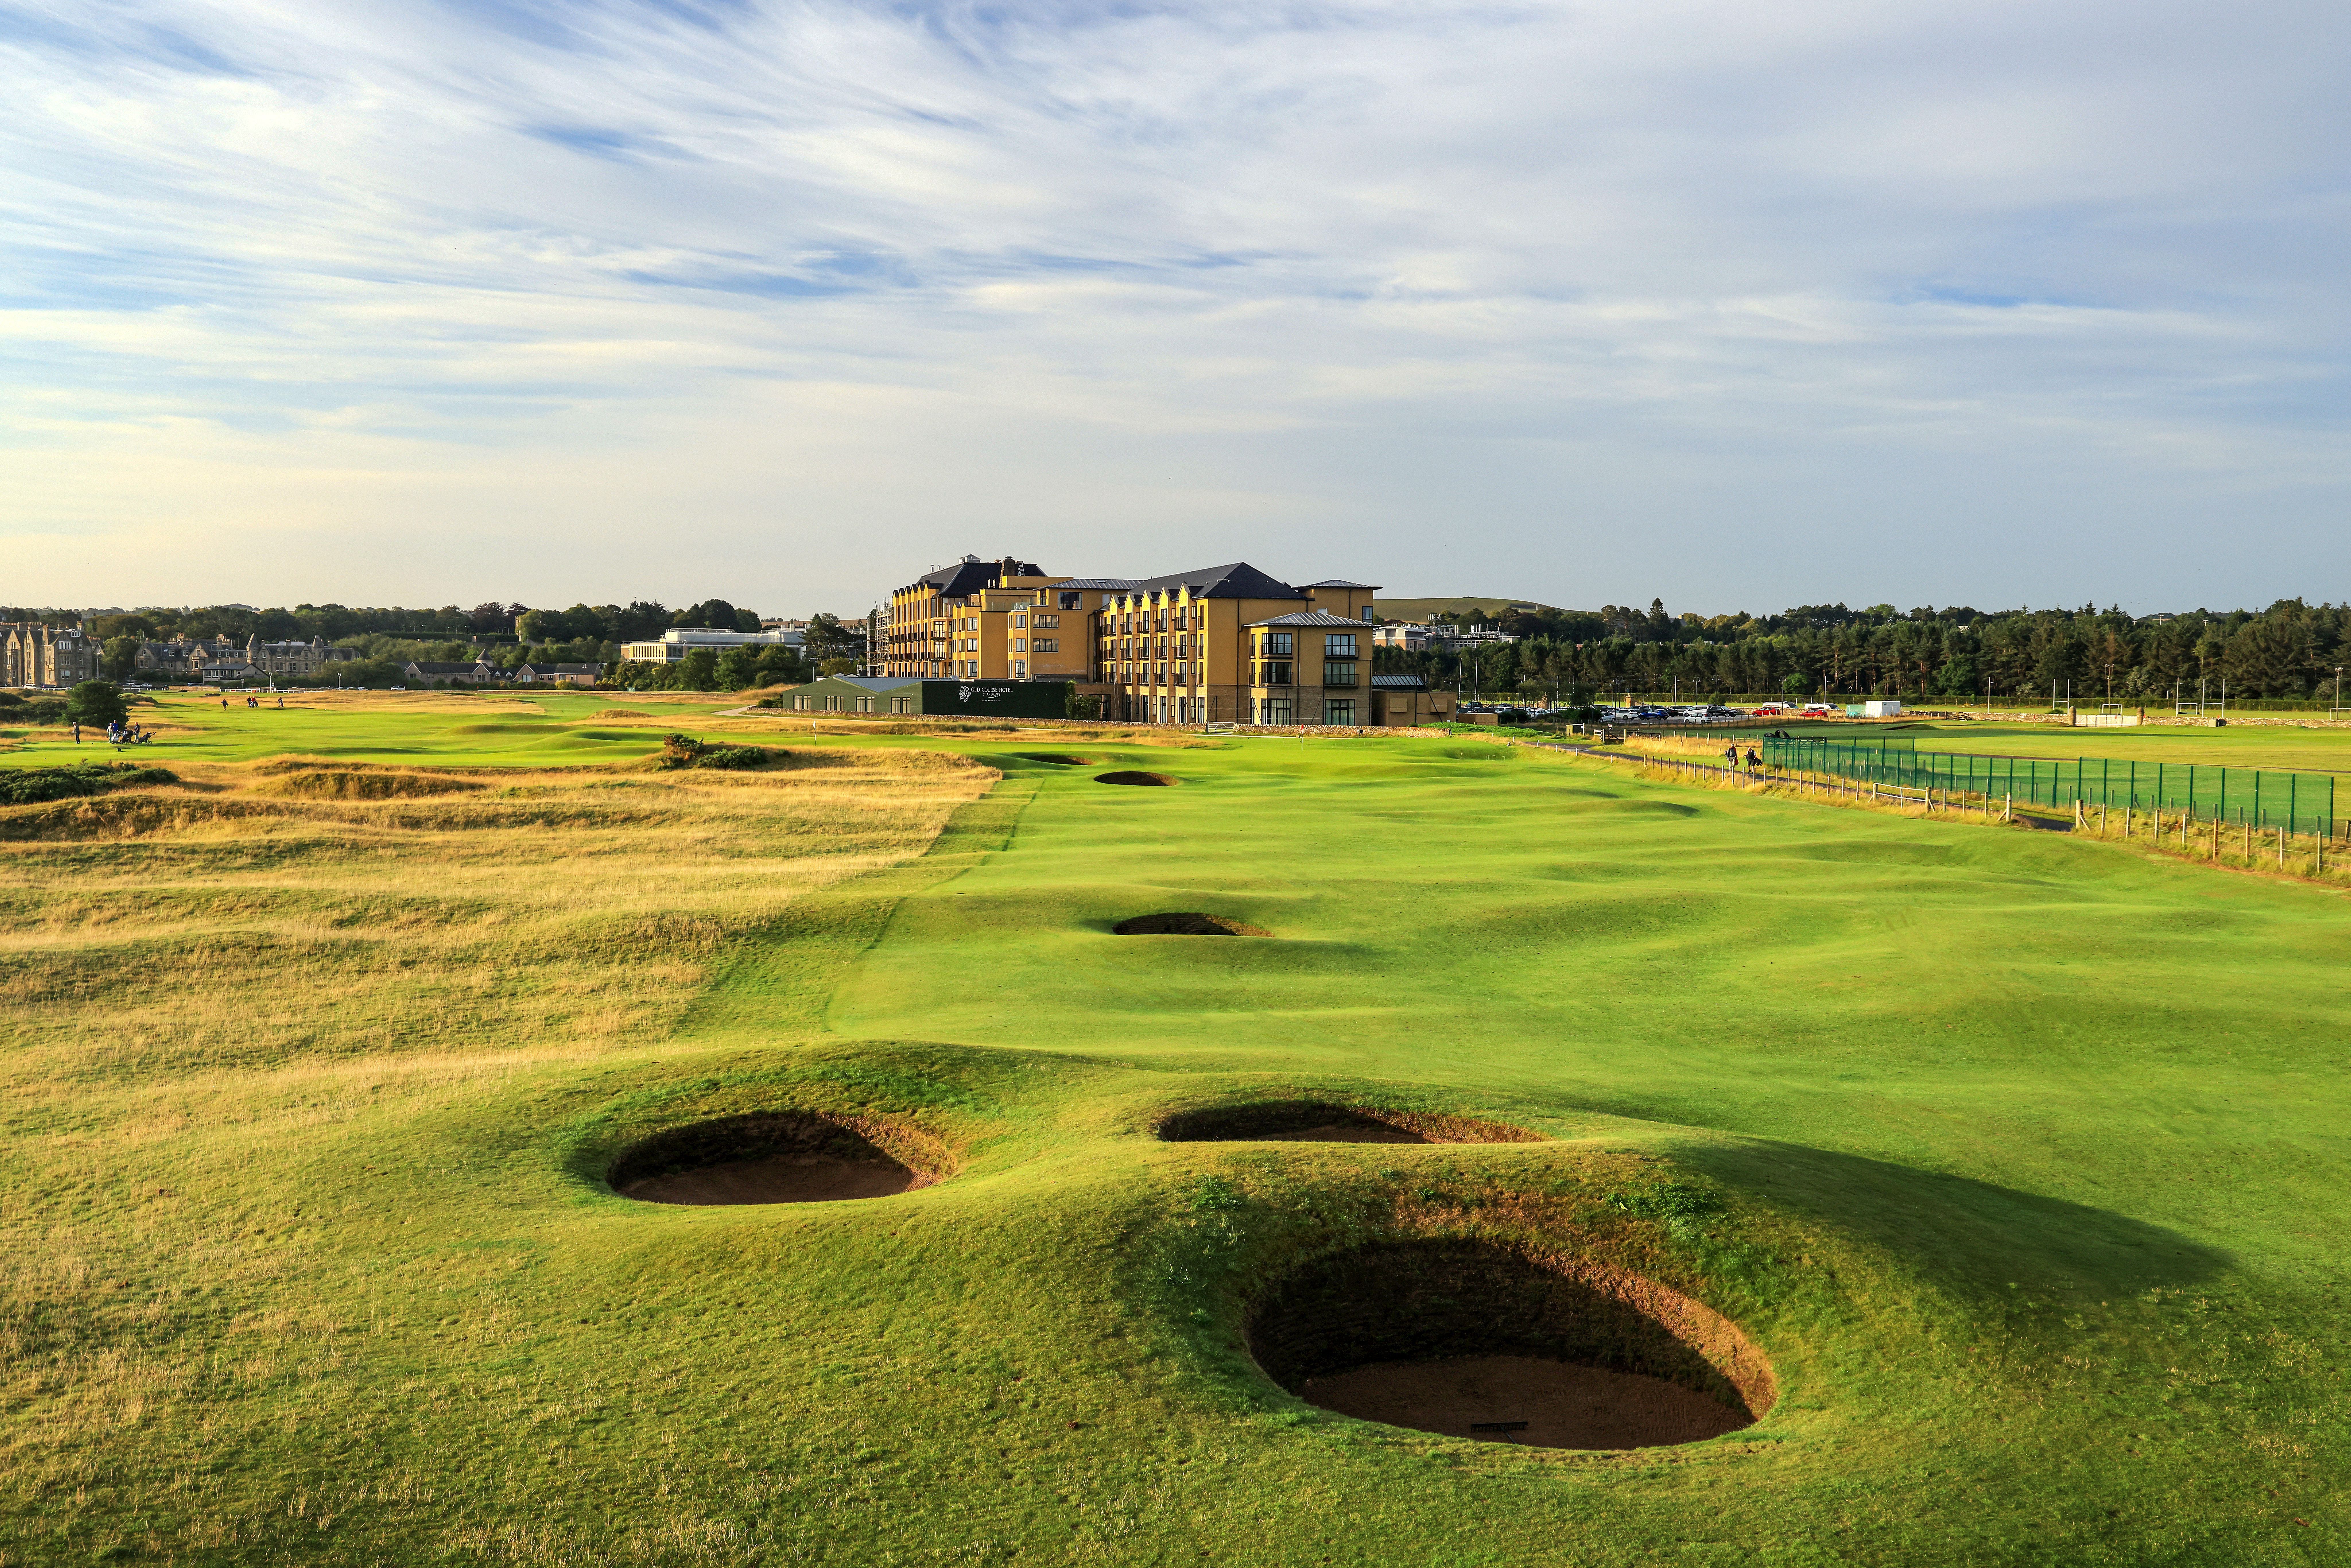 Bunkers at the Old Course in St. Andrews